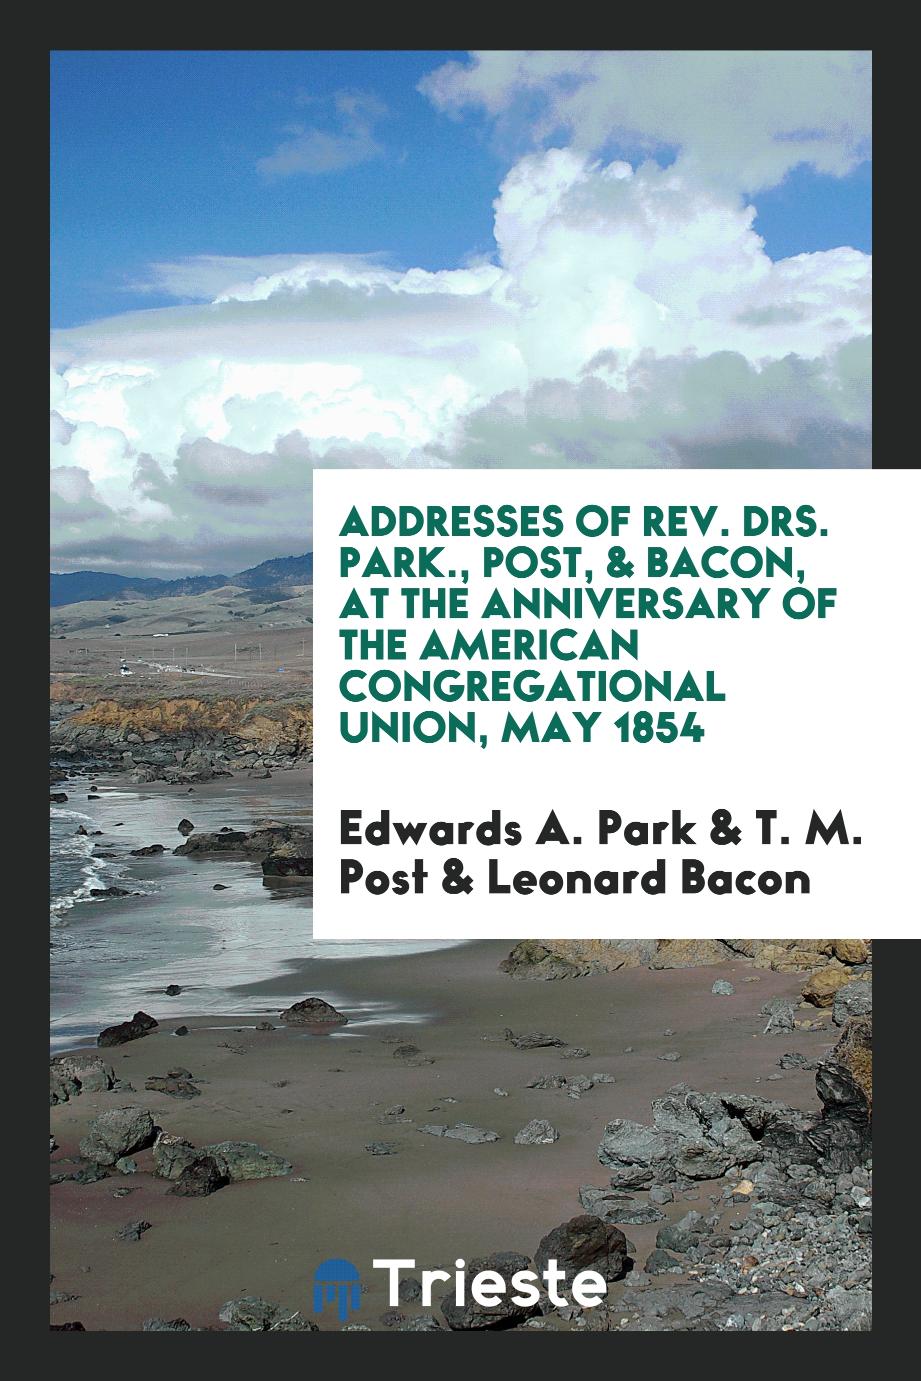 Addresses of Rev. Drs. Park., Post, & Bacon, at the Anniversary of the American Congregational Union, May 1854